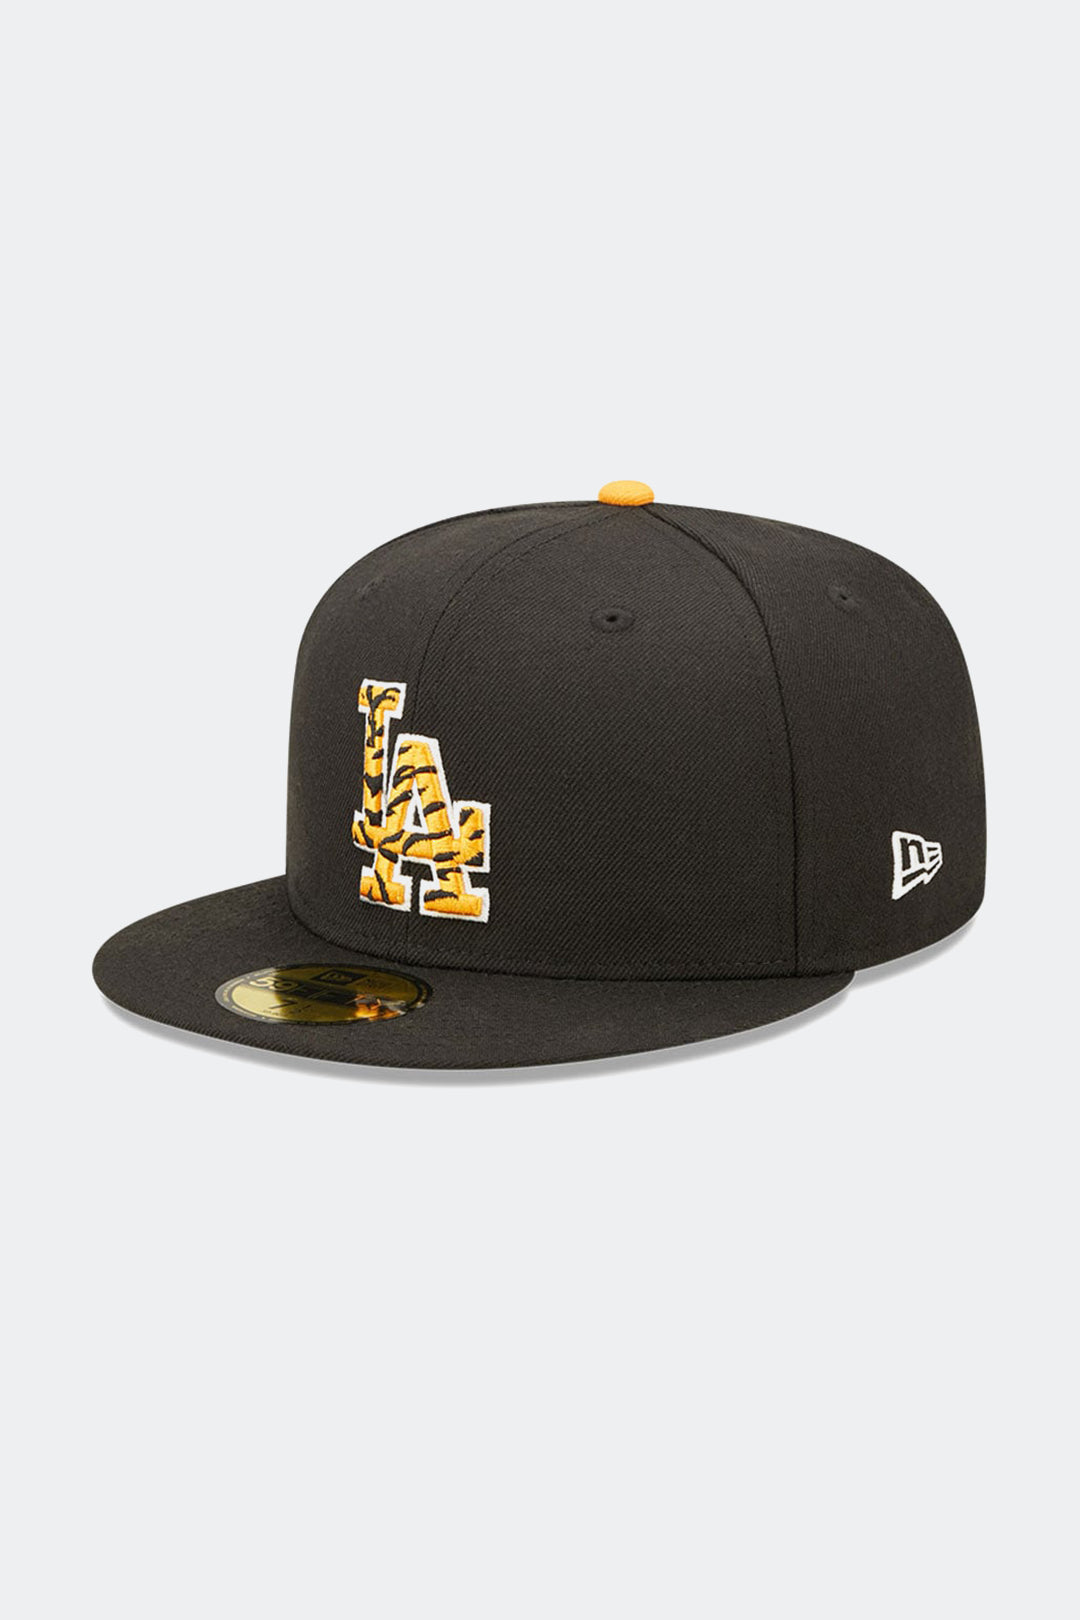 NEW ERA 59FIFTY LOS ANGELES DODGERS "TIGERFIL" - HYPE